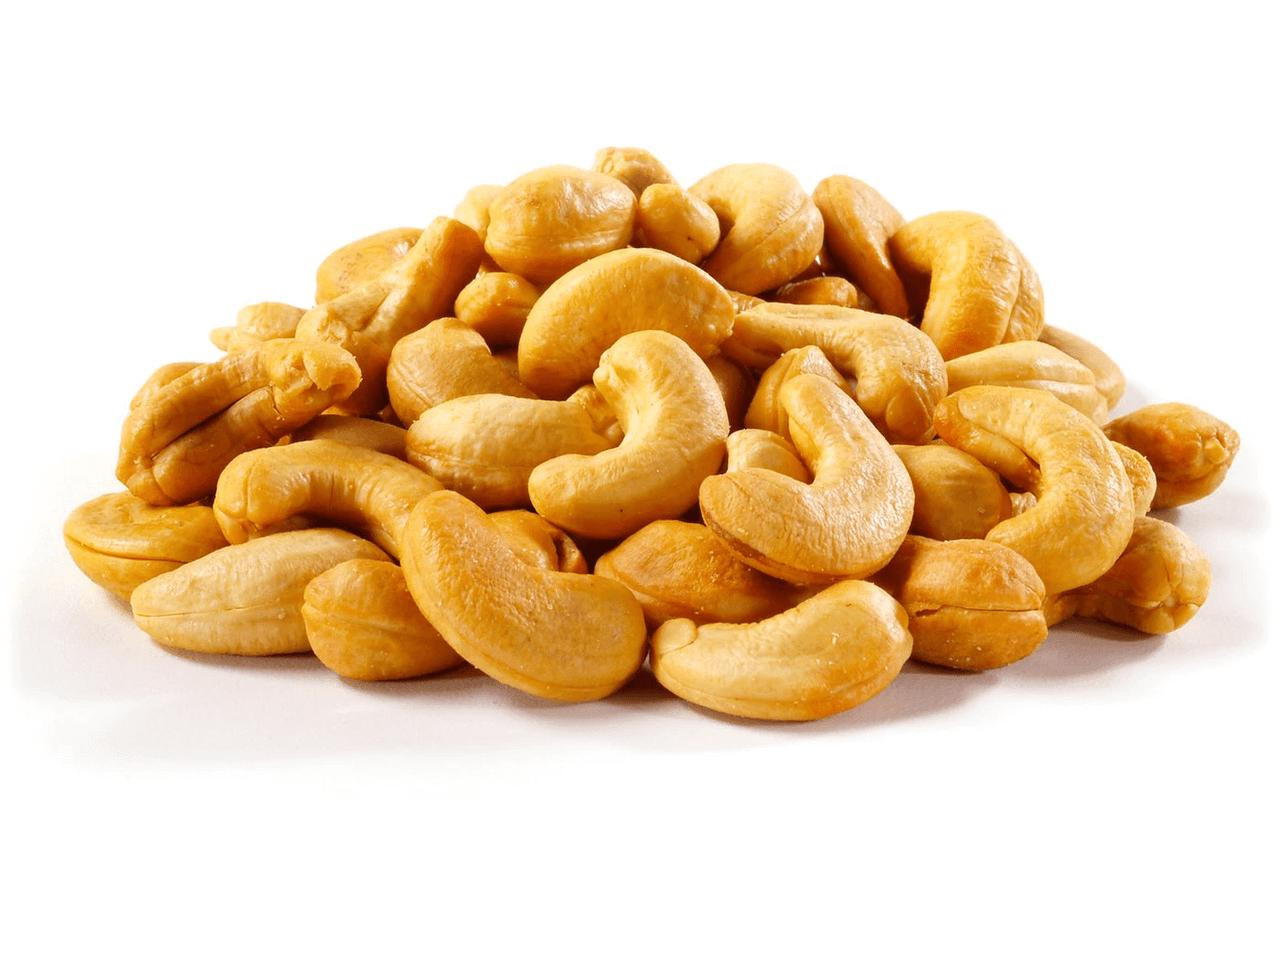 Chicken Pieces Dry Roasted Cashews Unsalted Bulk Food Service 25 lbs/11.33 kgs 